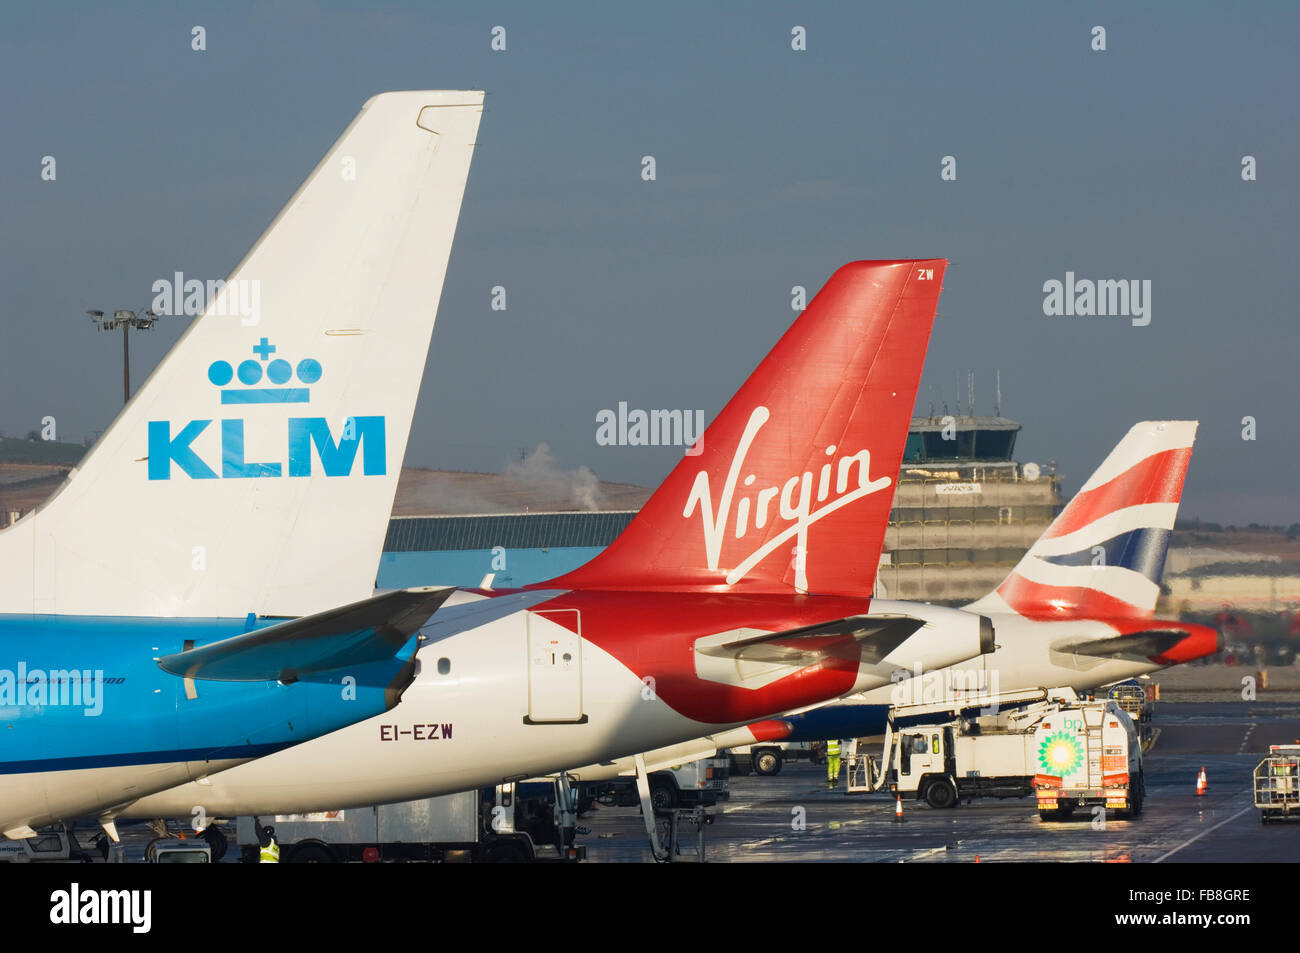 Aircraft tails showing the markings of different airlines - Aberdeen airport, Scotland. Stock Photo